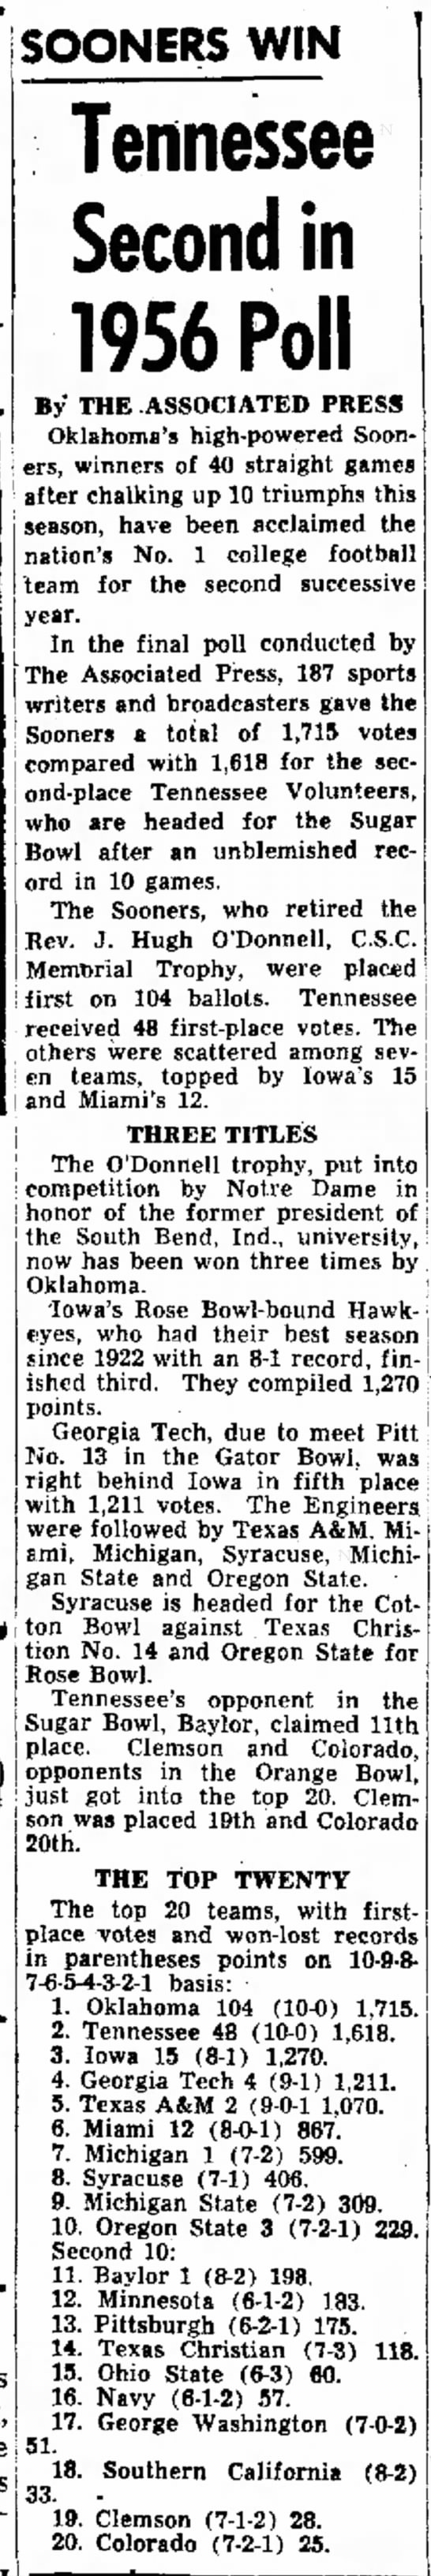 Sooners Win: Tennessee Second in 1956 Poll - 